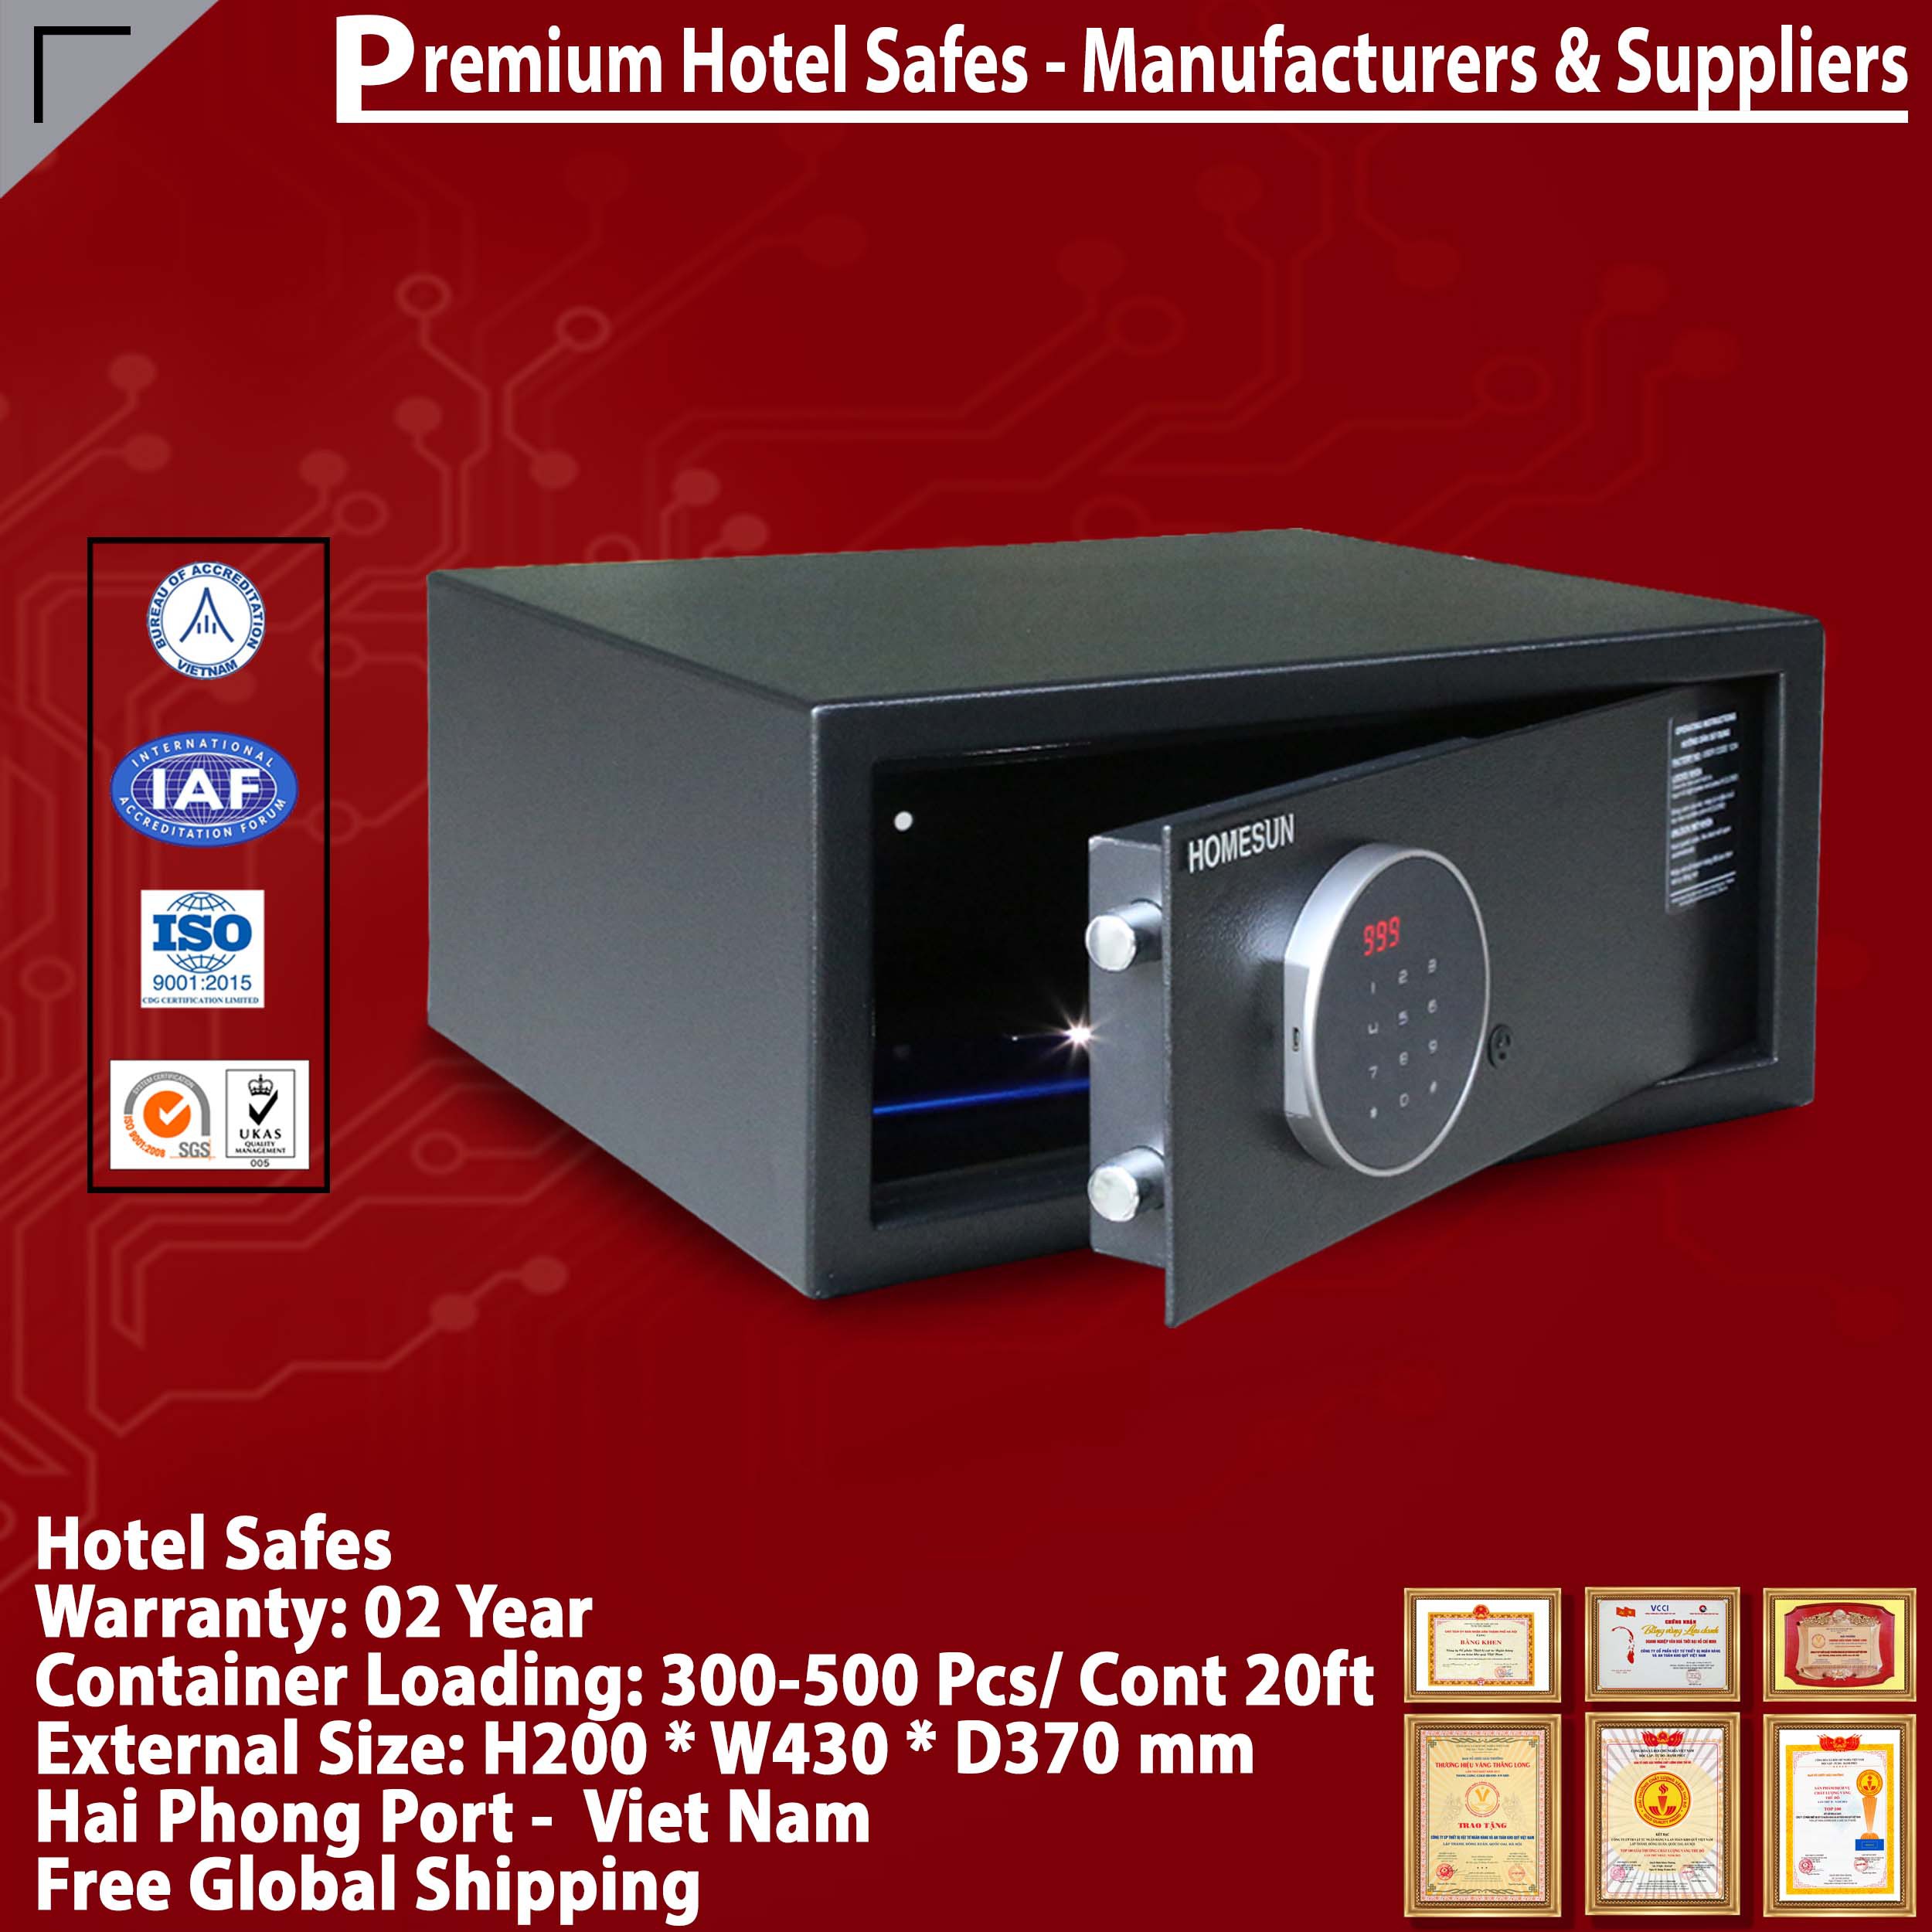 Hotel Safe Dimensions High Quality Price Ratio‎